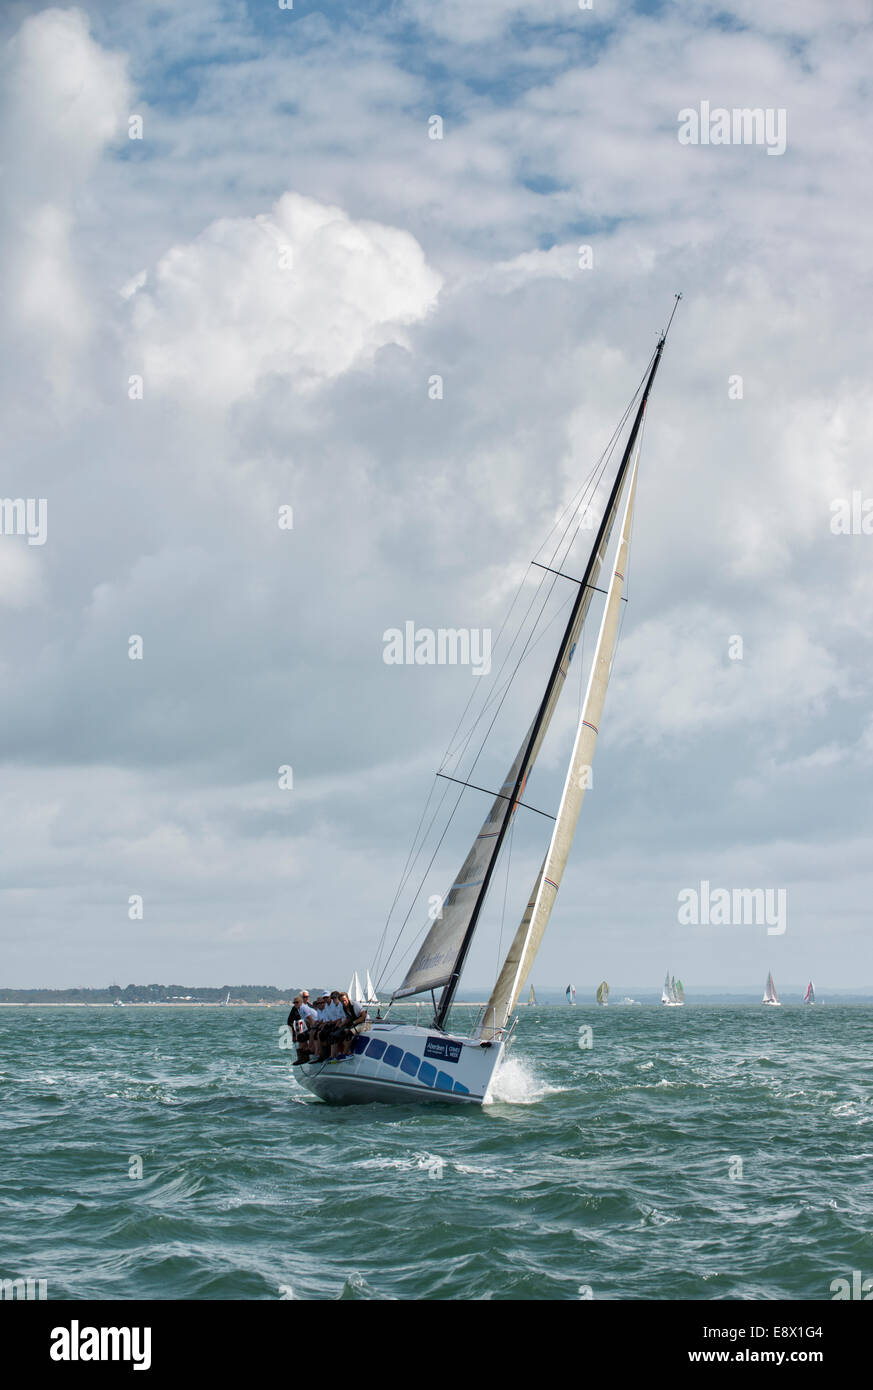 Racing Yacht competing in the 2014 Cowes Week Regatta in the Solent off the Isle of Wight Stock Photo